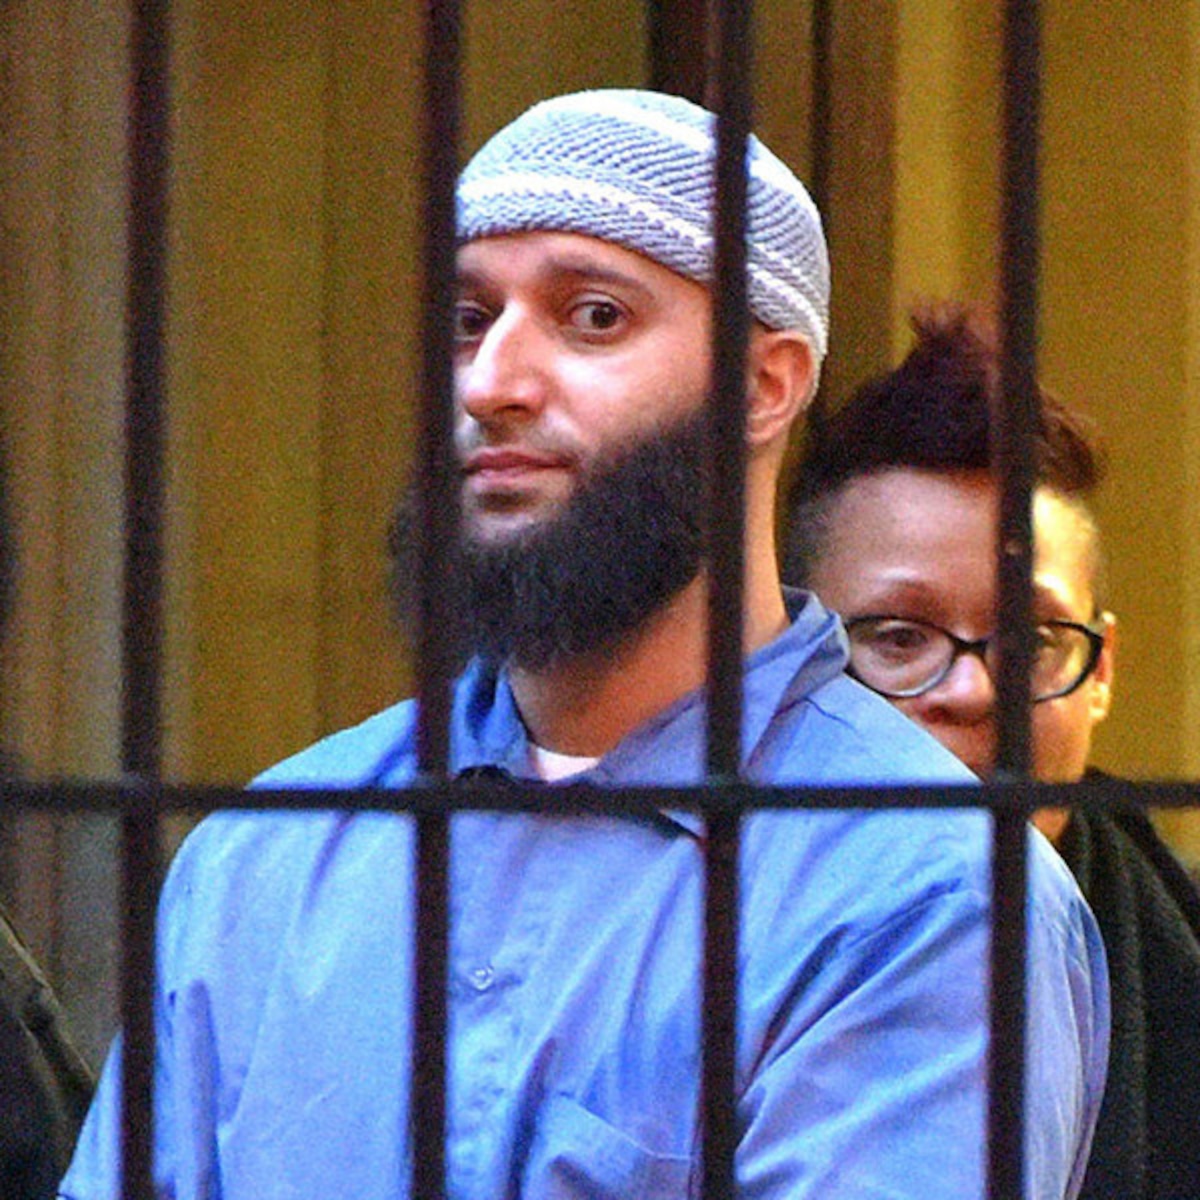 If Serial's Adnan Syed Didn't Murder Hae Min Lee, Then Who Did? - E! Online